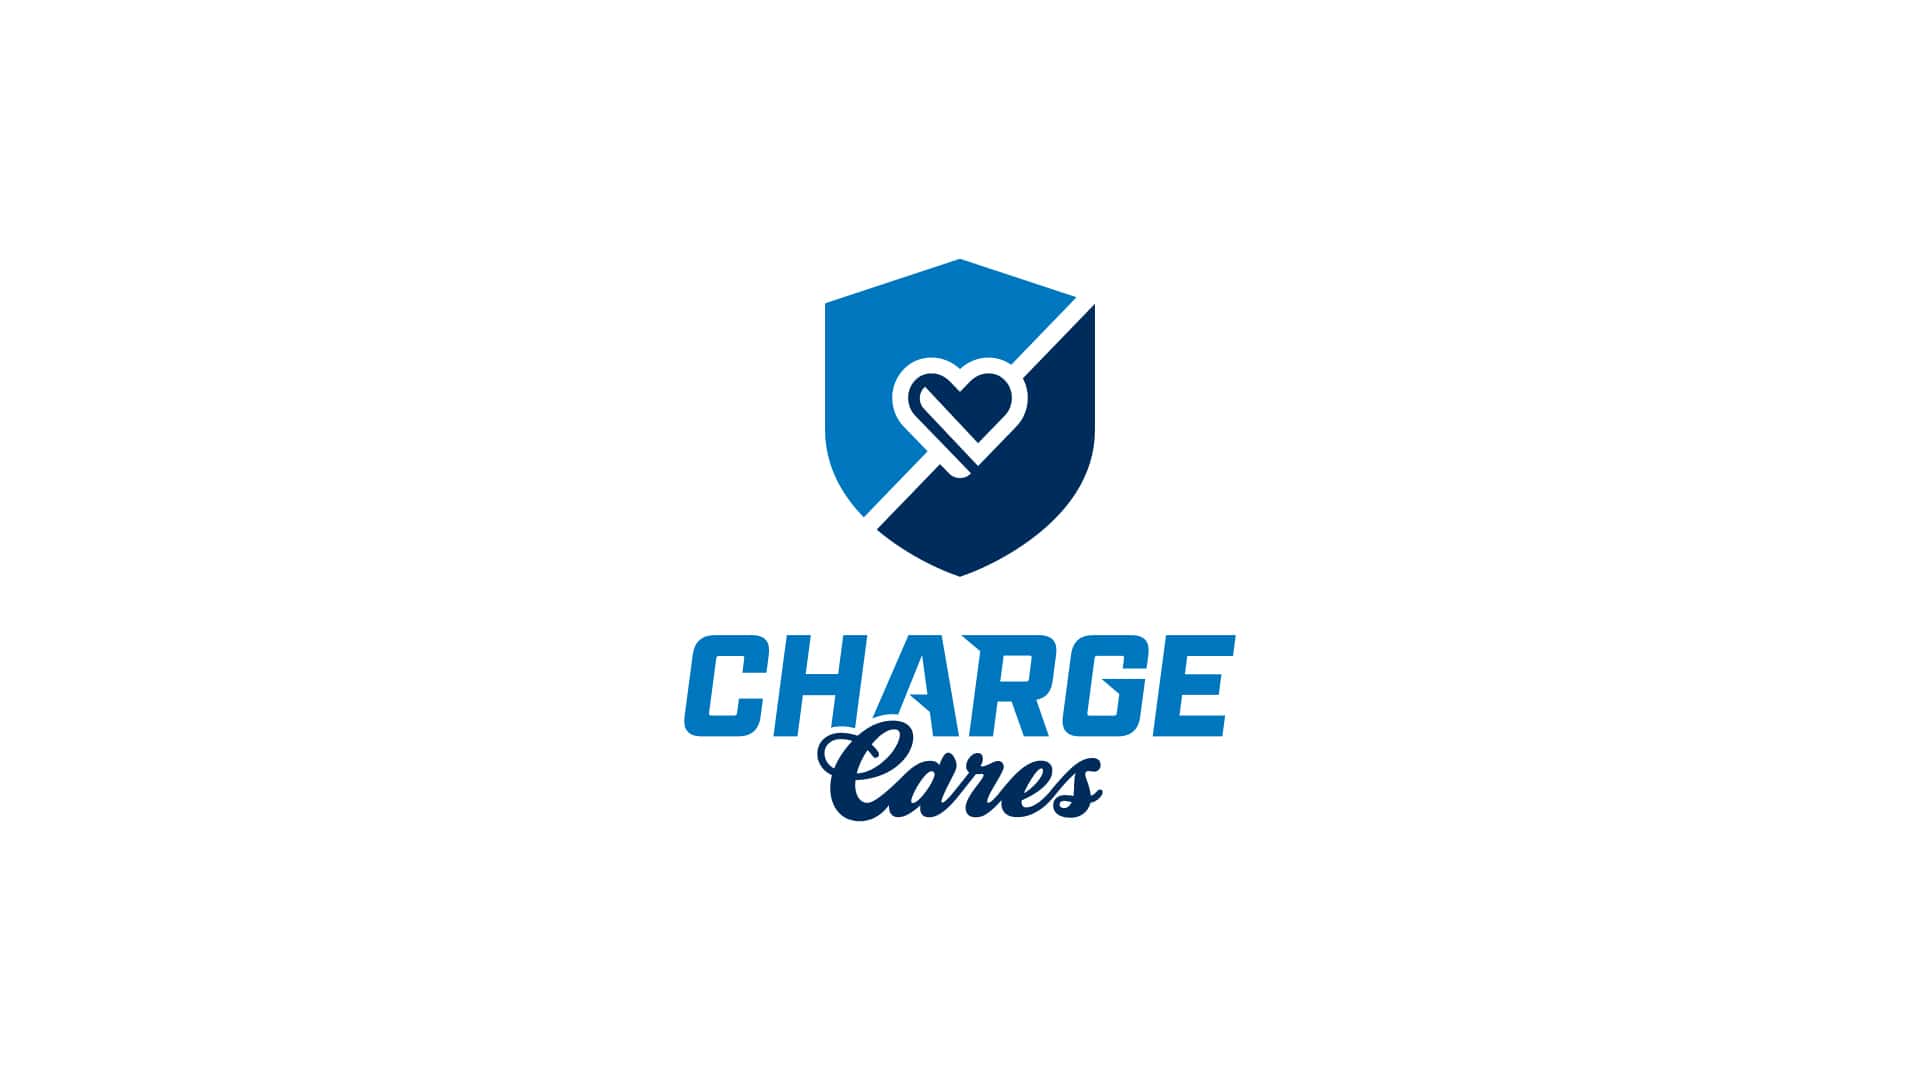 Charge logo for corporate initiatives